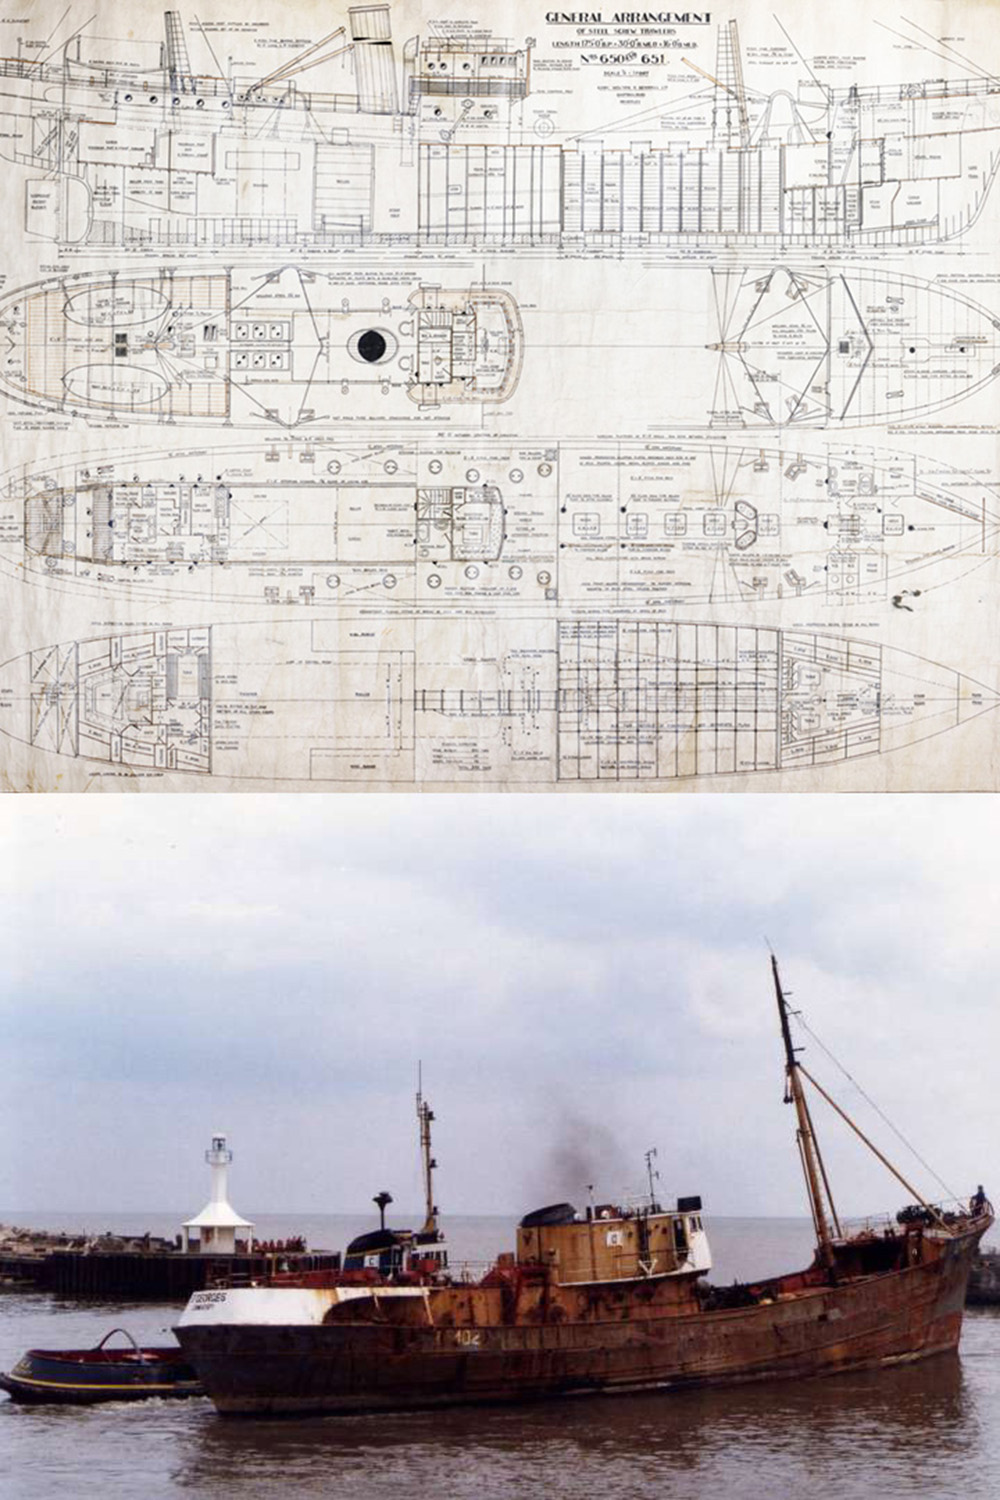 Plans for a ship